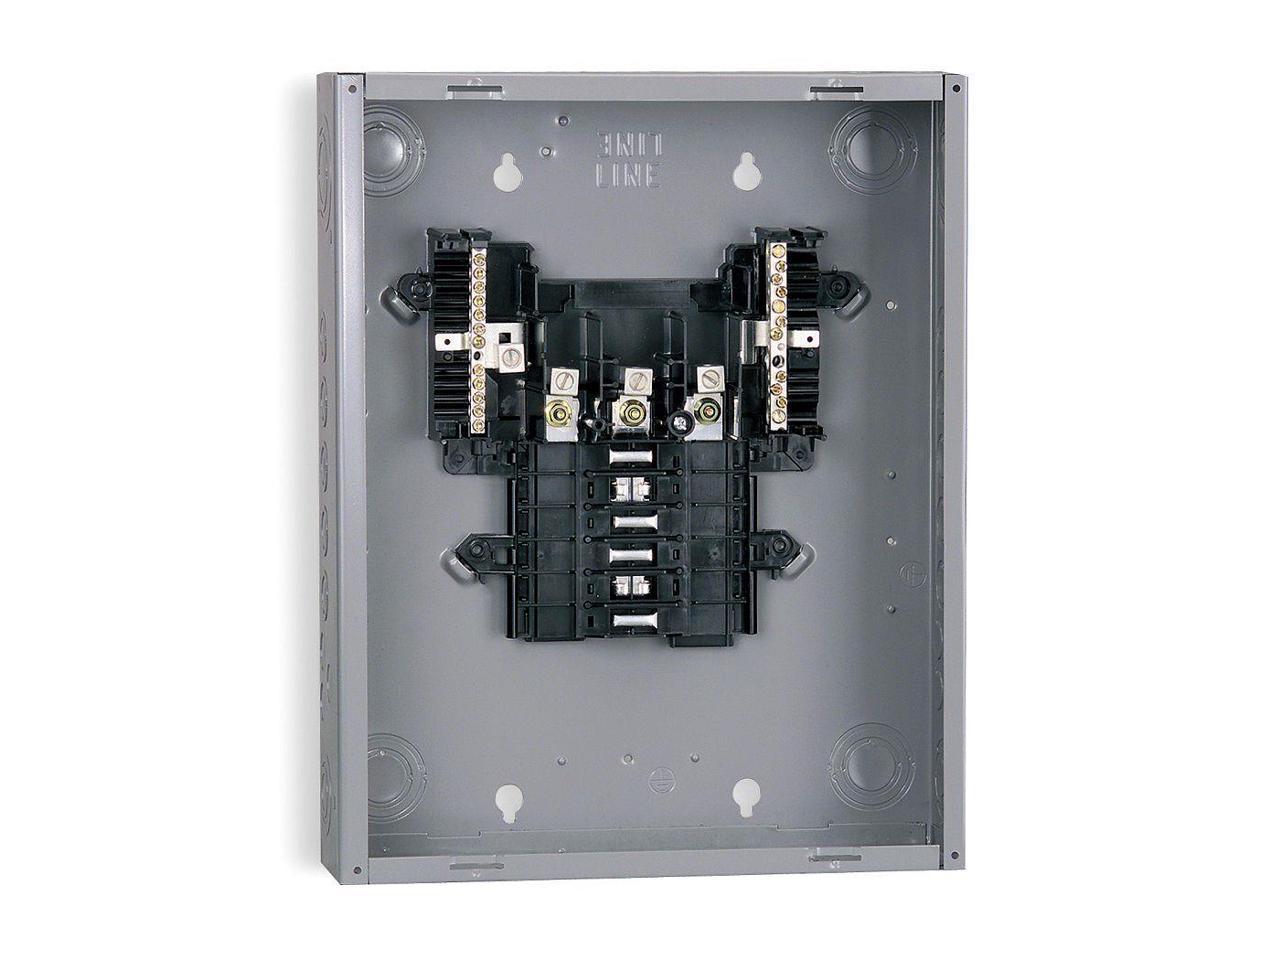 QO403L60NF SQUARE D UpTo 3 NEW at MostElectric